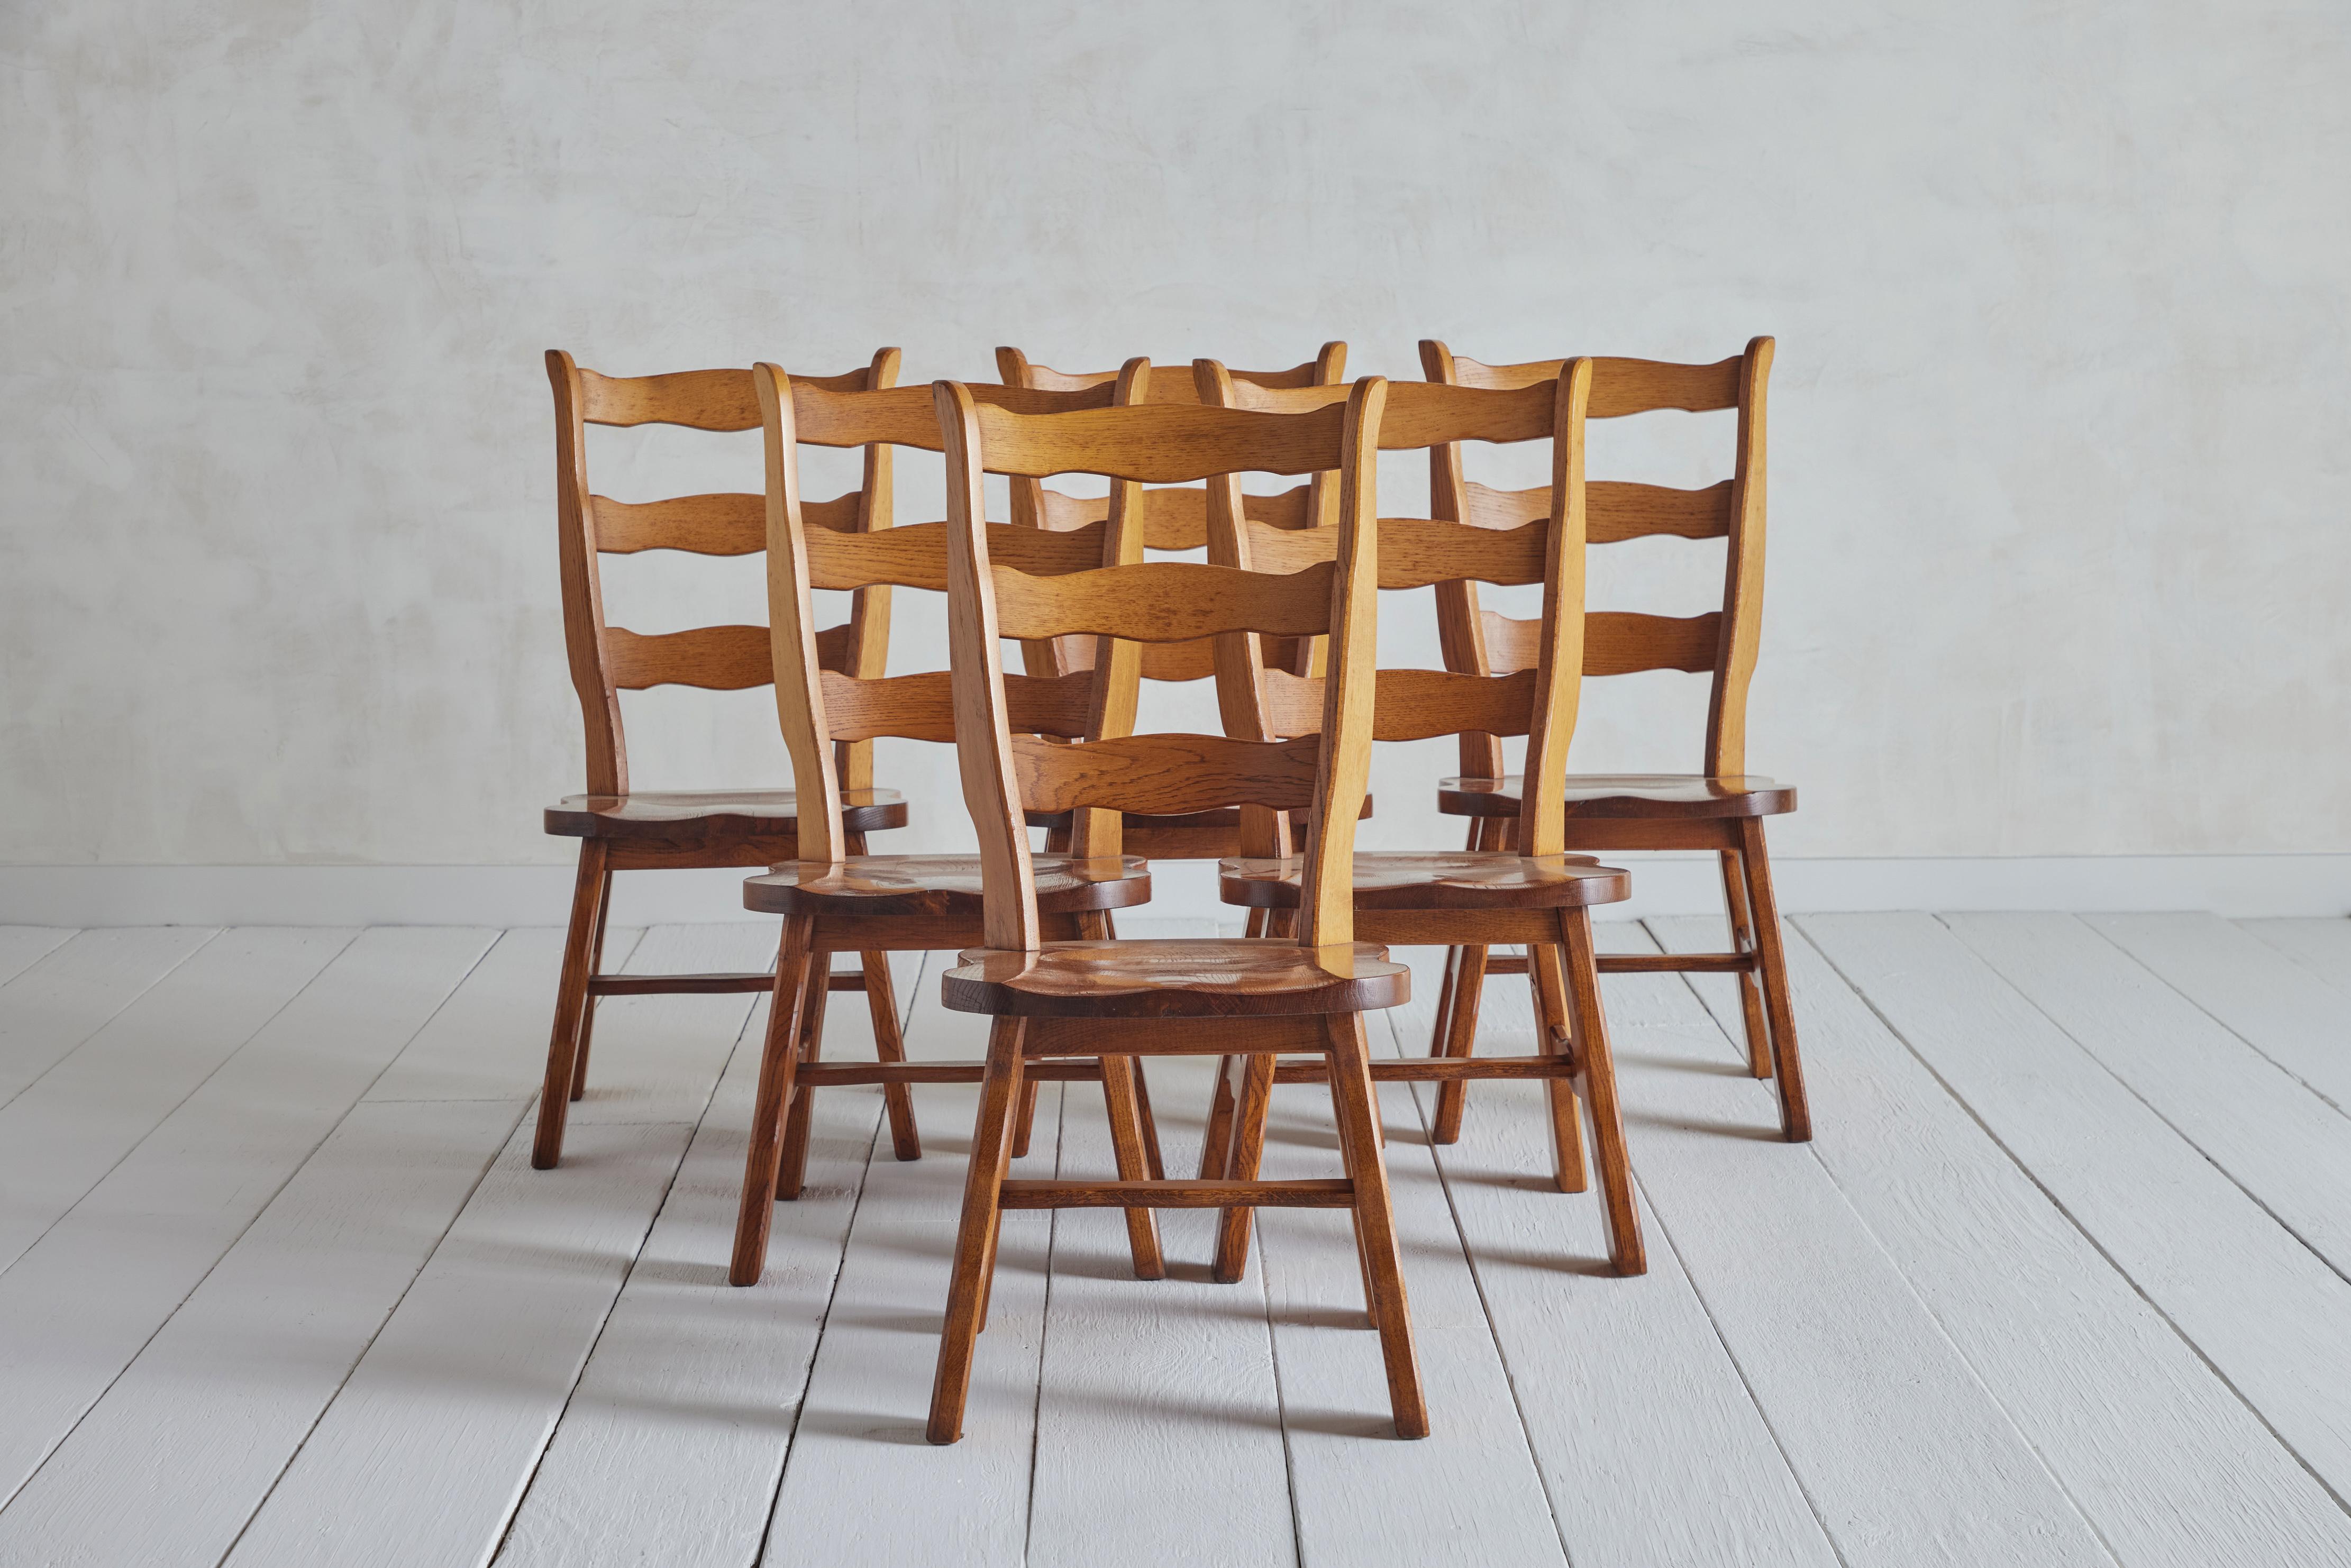 Set of six Brutalist ladderback chairs from Belgium circa 1960. Made of solid oak. Wear on wood and finish is consistent with age and use.